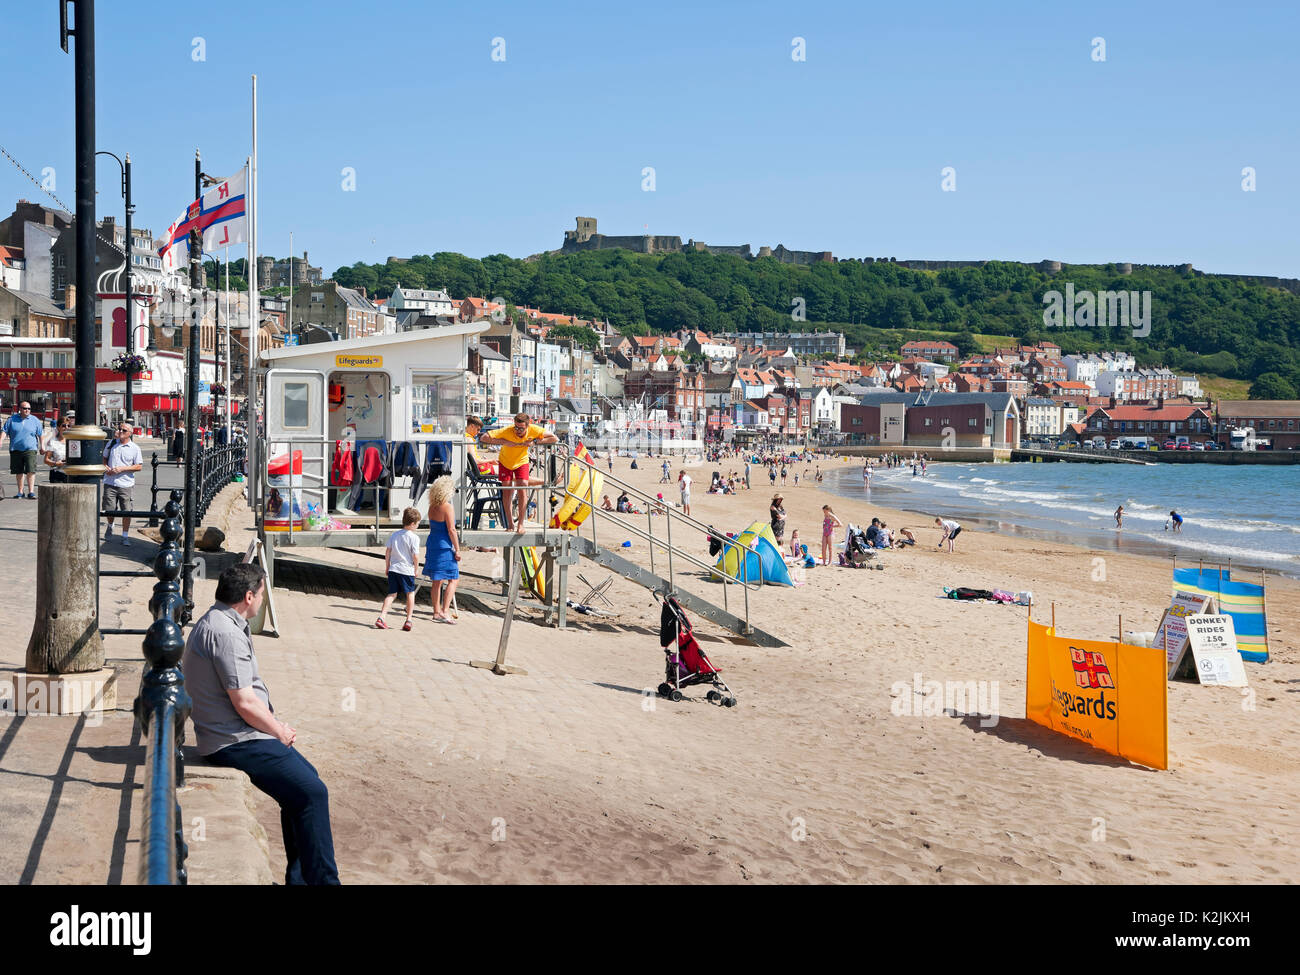 RNLI lifeguard station hut and people visitors tourists in summer South Bay Scarborough Beach North Yorkshire England UK United Kingdom Britain Stock Photo